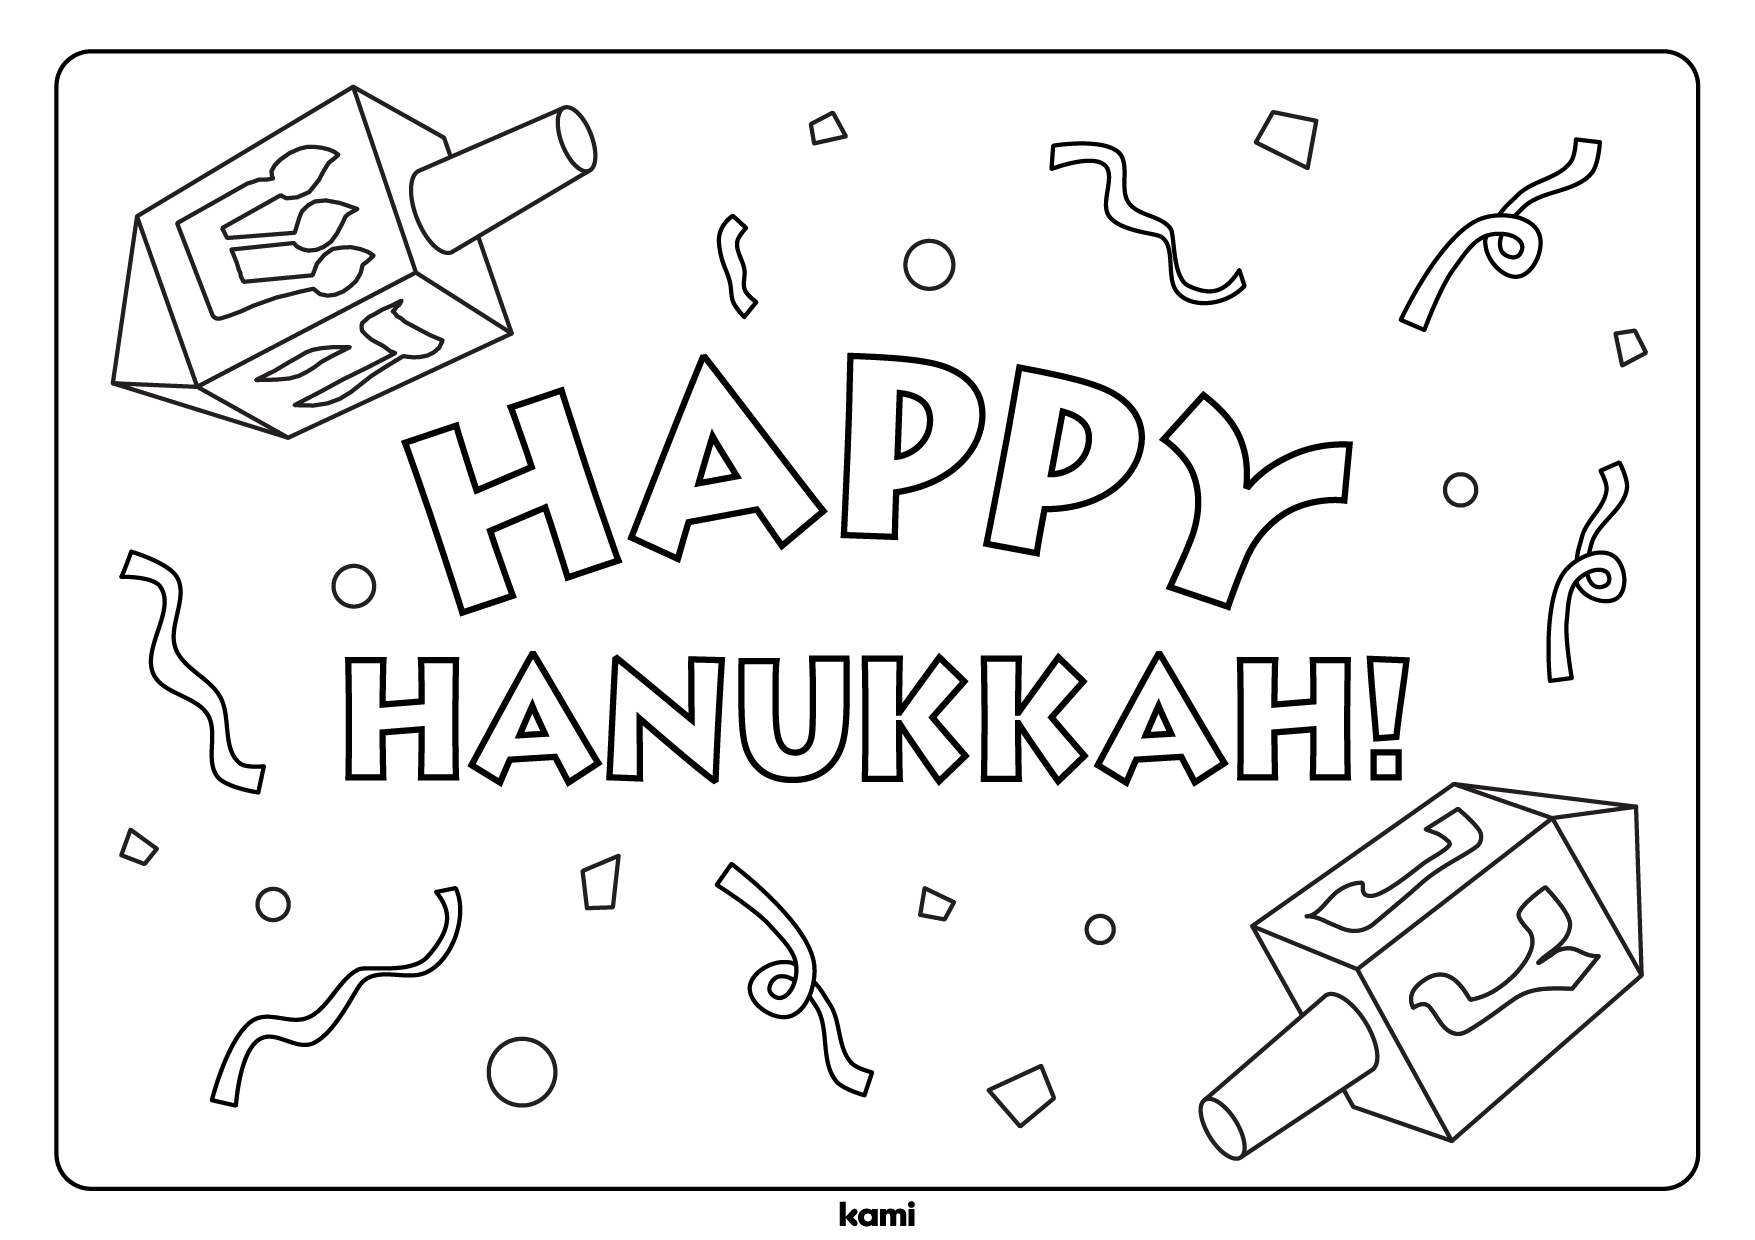 Hanukkah dreidel coloring sheet for teachers perfect for grades st nd k pre k other classroom resources kami library